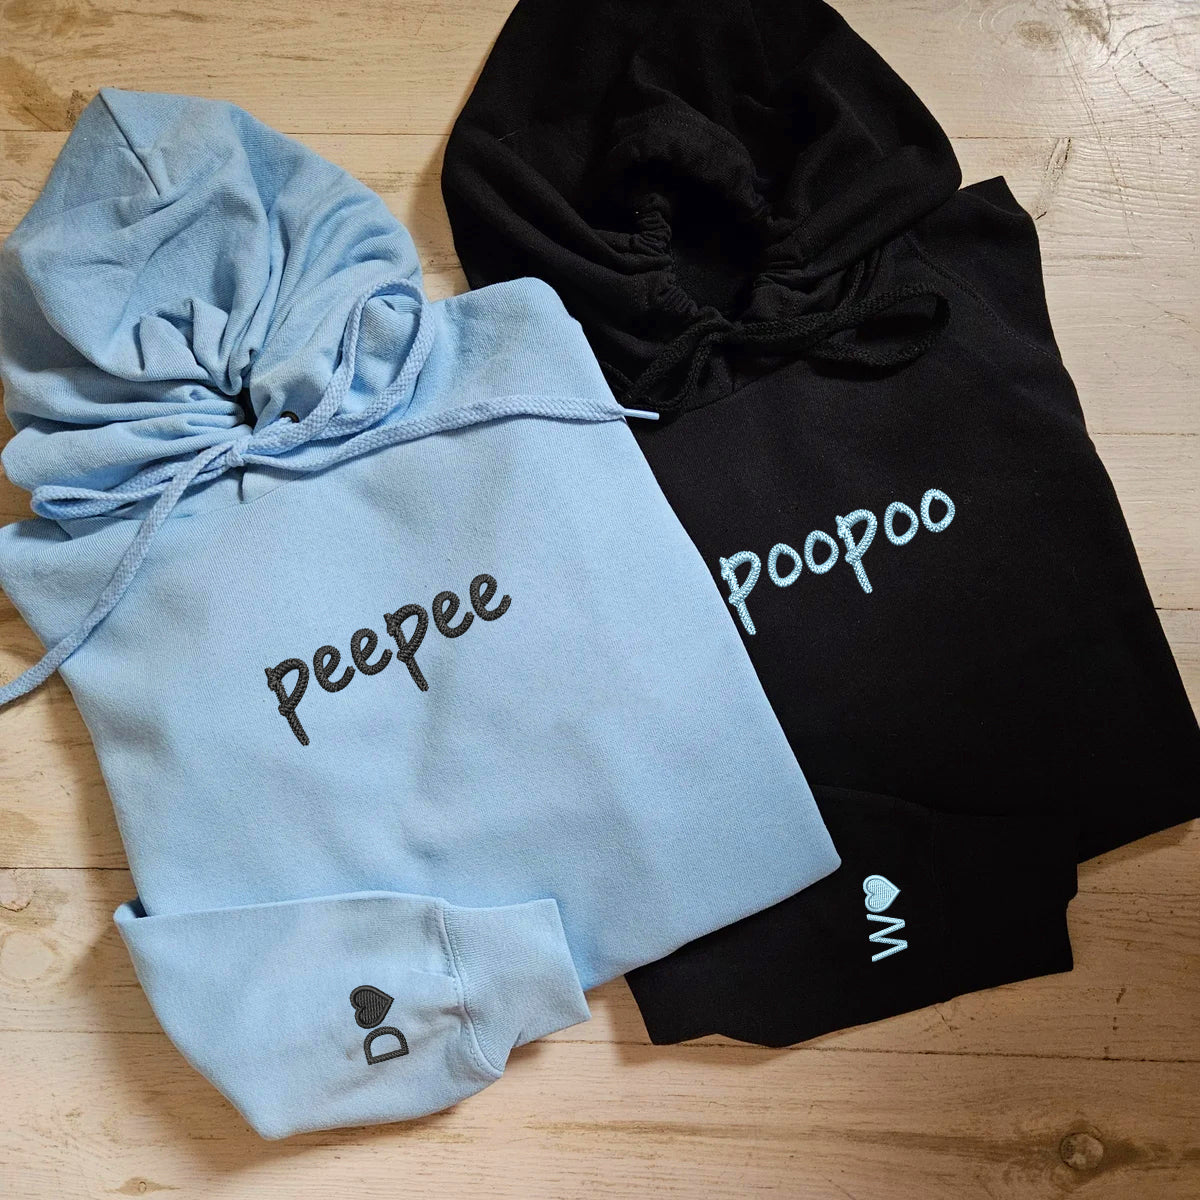 Custom Embroidered Peepee Poopoo Matching Hoodies for Couples